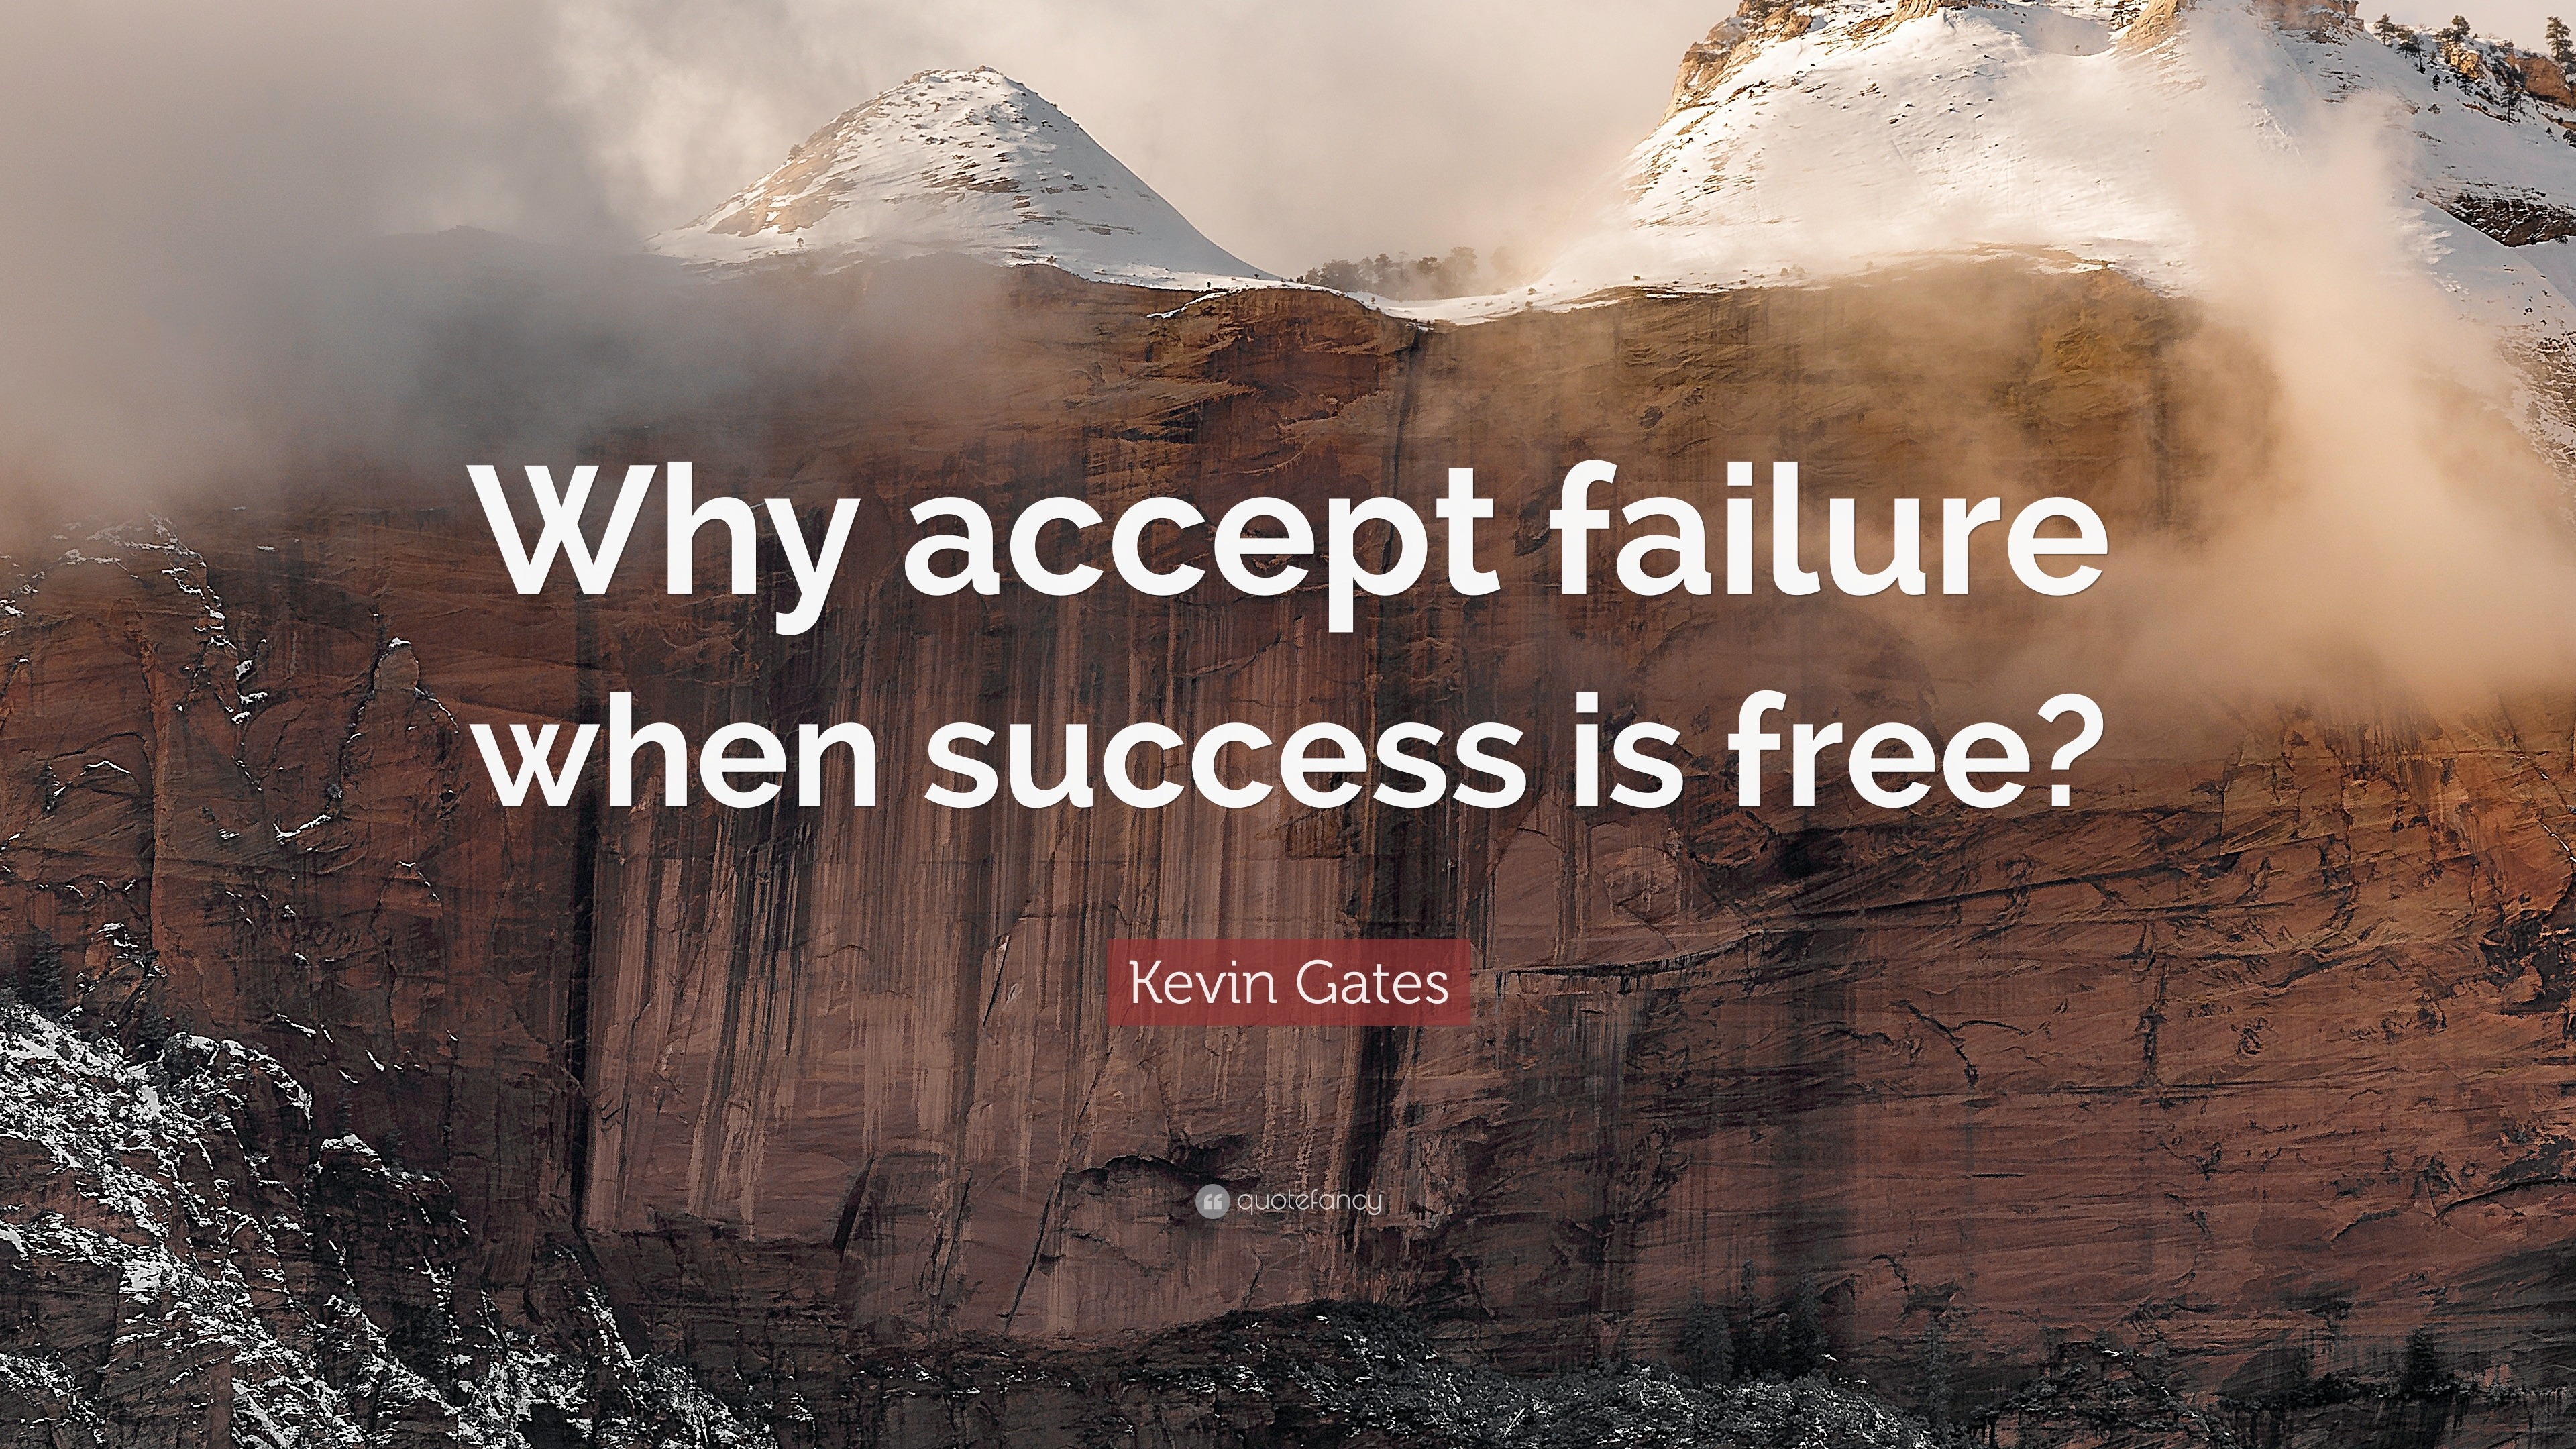 Kevin Gates Quote: “Why accept failure when success is free?” (20